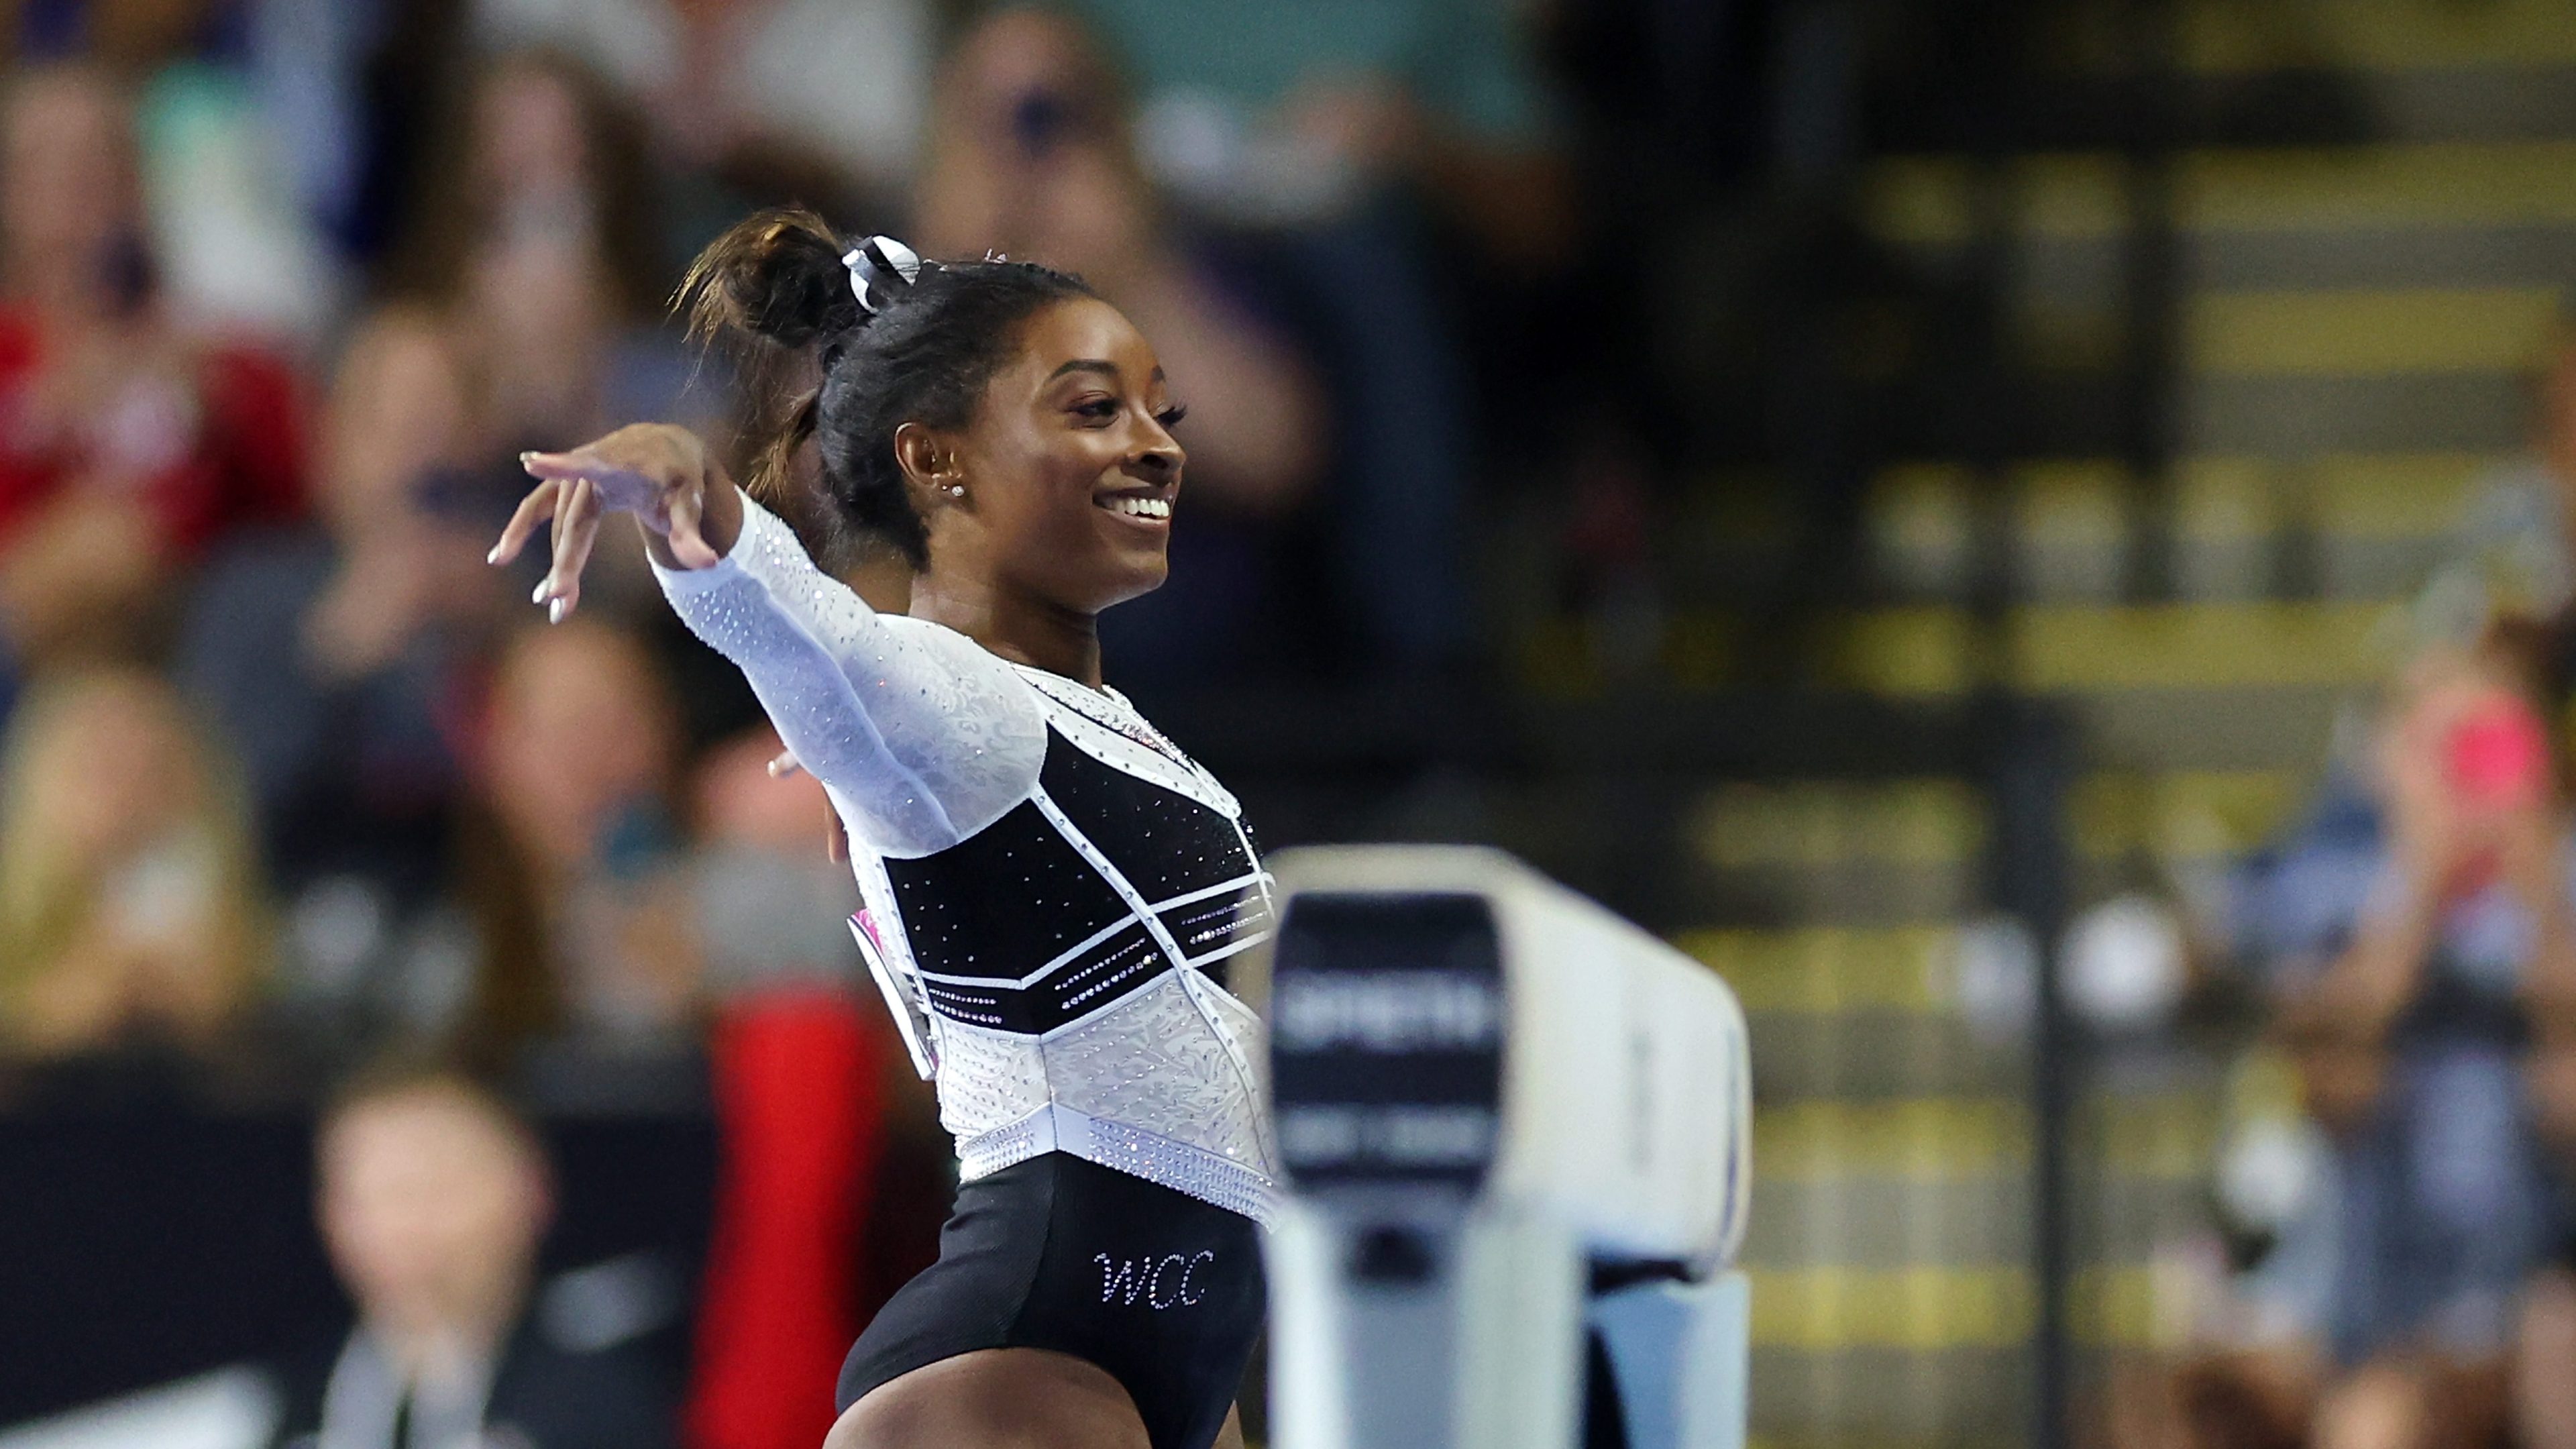 Simone Biles smiling after she competes on the balance beam during the Core Hydration Classic at Now Arena on August 05, 2023 in Hoffman Estates, Illinois.